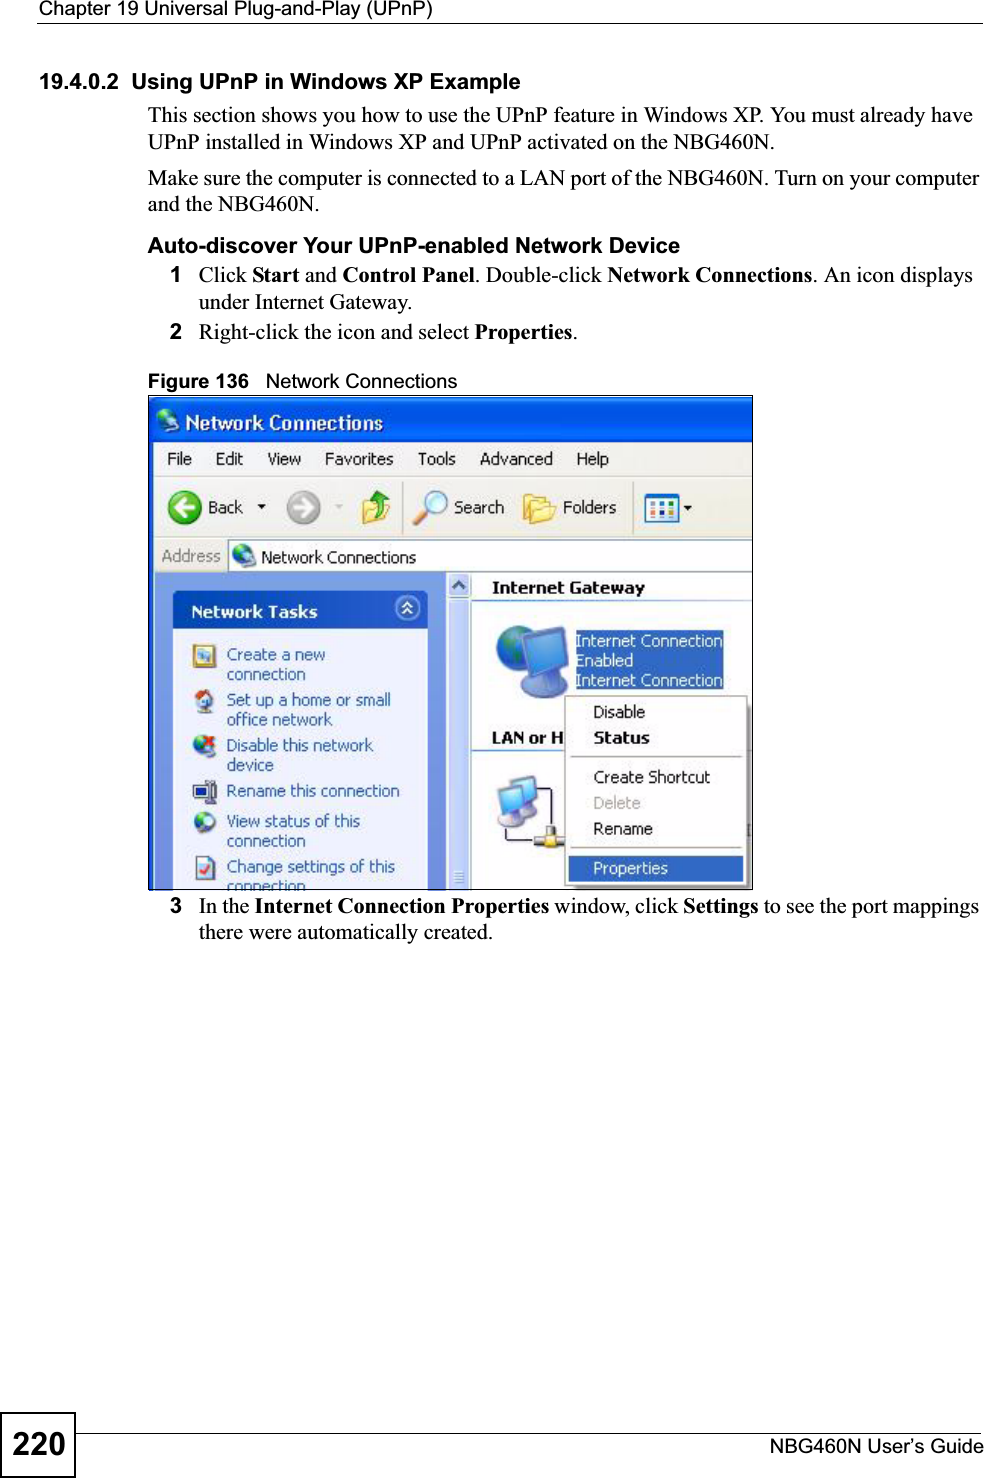 Chapter 19 Universal Plug-and-Play (UPnP)NBG460N User’s Guide22019.4.0.2  Using UPnP in Windows XP ExampleThis section shows you how to use the UPnP feature in Windows XP. You must already have UPnP installed in Windows XP and UPnP activated on the NBG460N.Make sure the computer is connected to a LAN port of the NBG460N. Turn on your computer and the NBG460N. Auto-discover Your UPnP-enabled Network Device1Click Start and Control Panel. Double-click Network Connections. An icon displays under Internet Gateway.2Right-click the icon and select Properties.Figure 136   Network Connections3In the Internet Connection Properties window, click Settings to see the port mappings there were automatically created. 